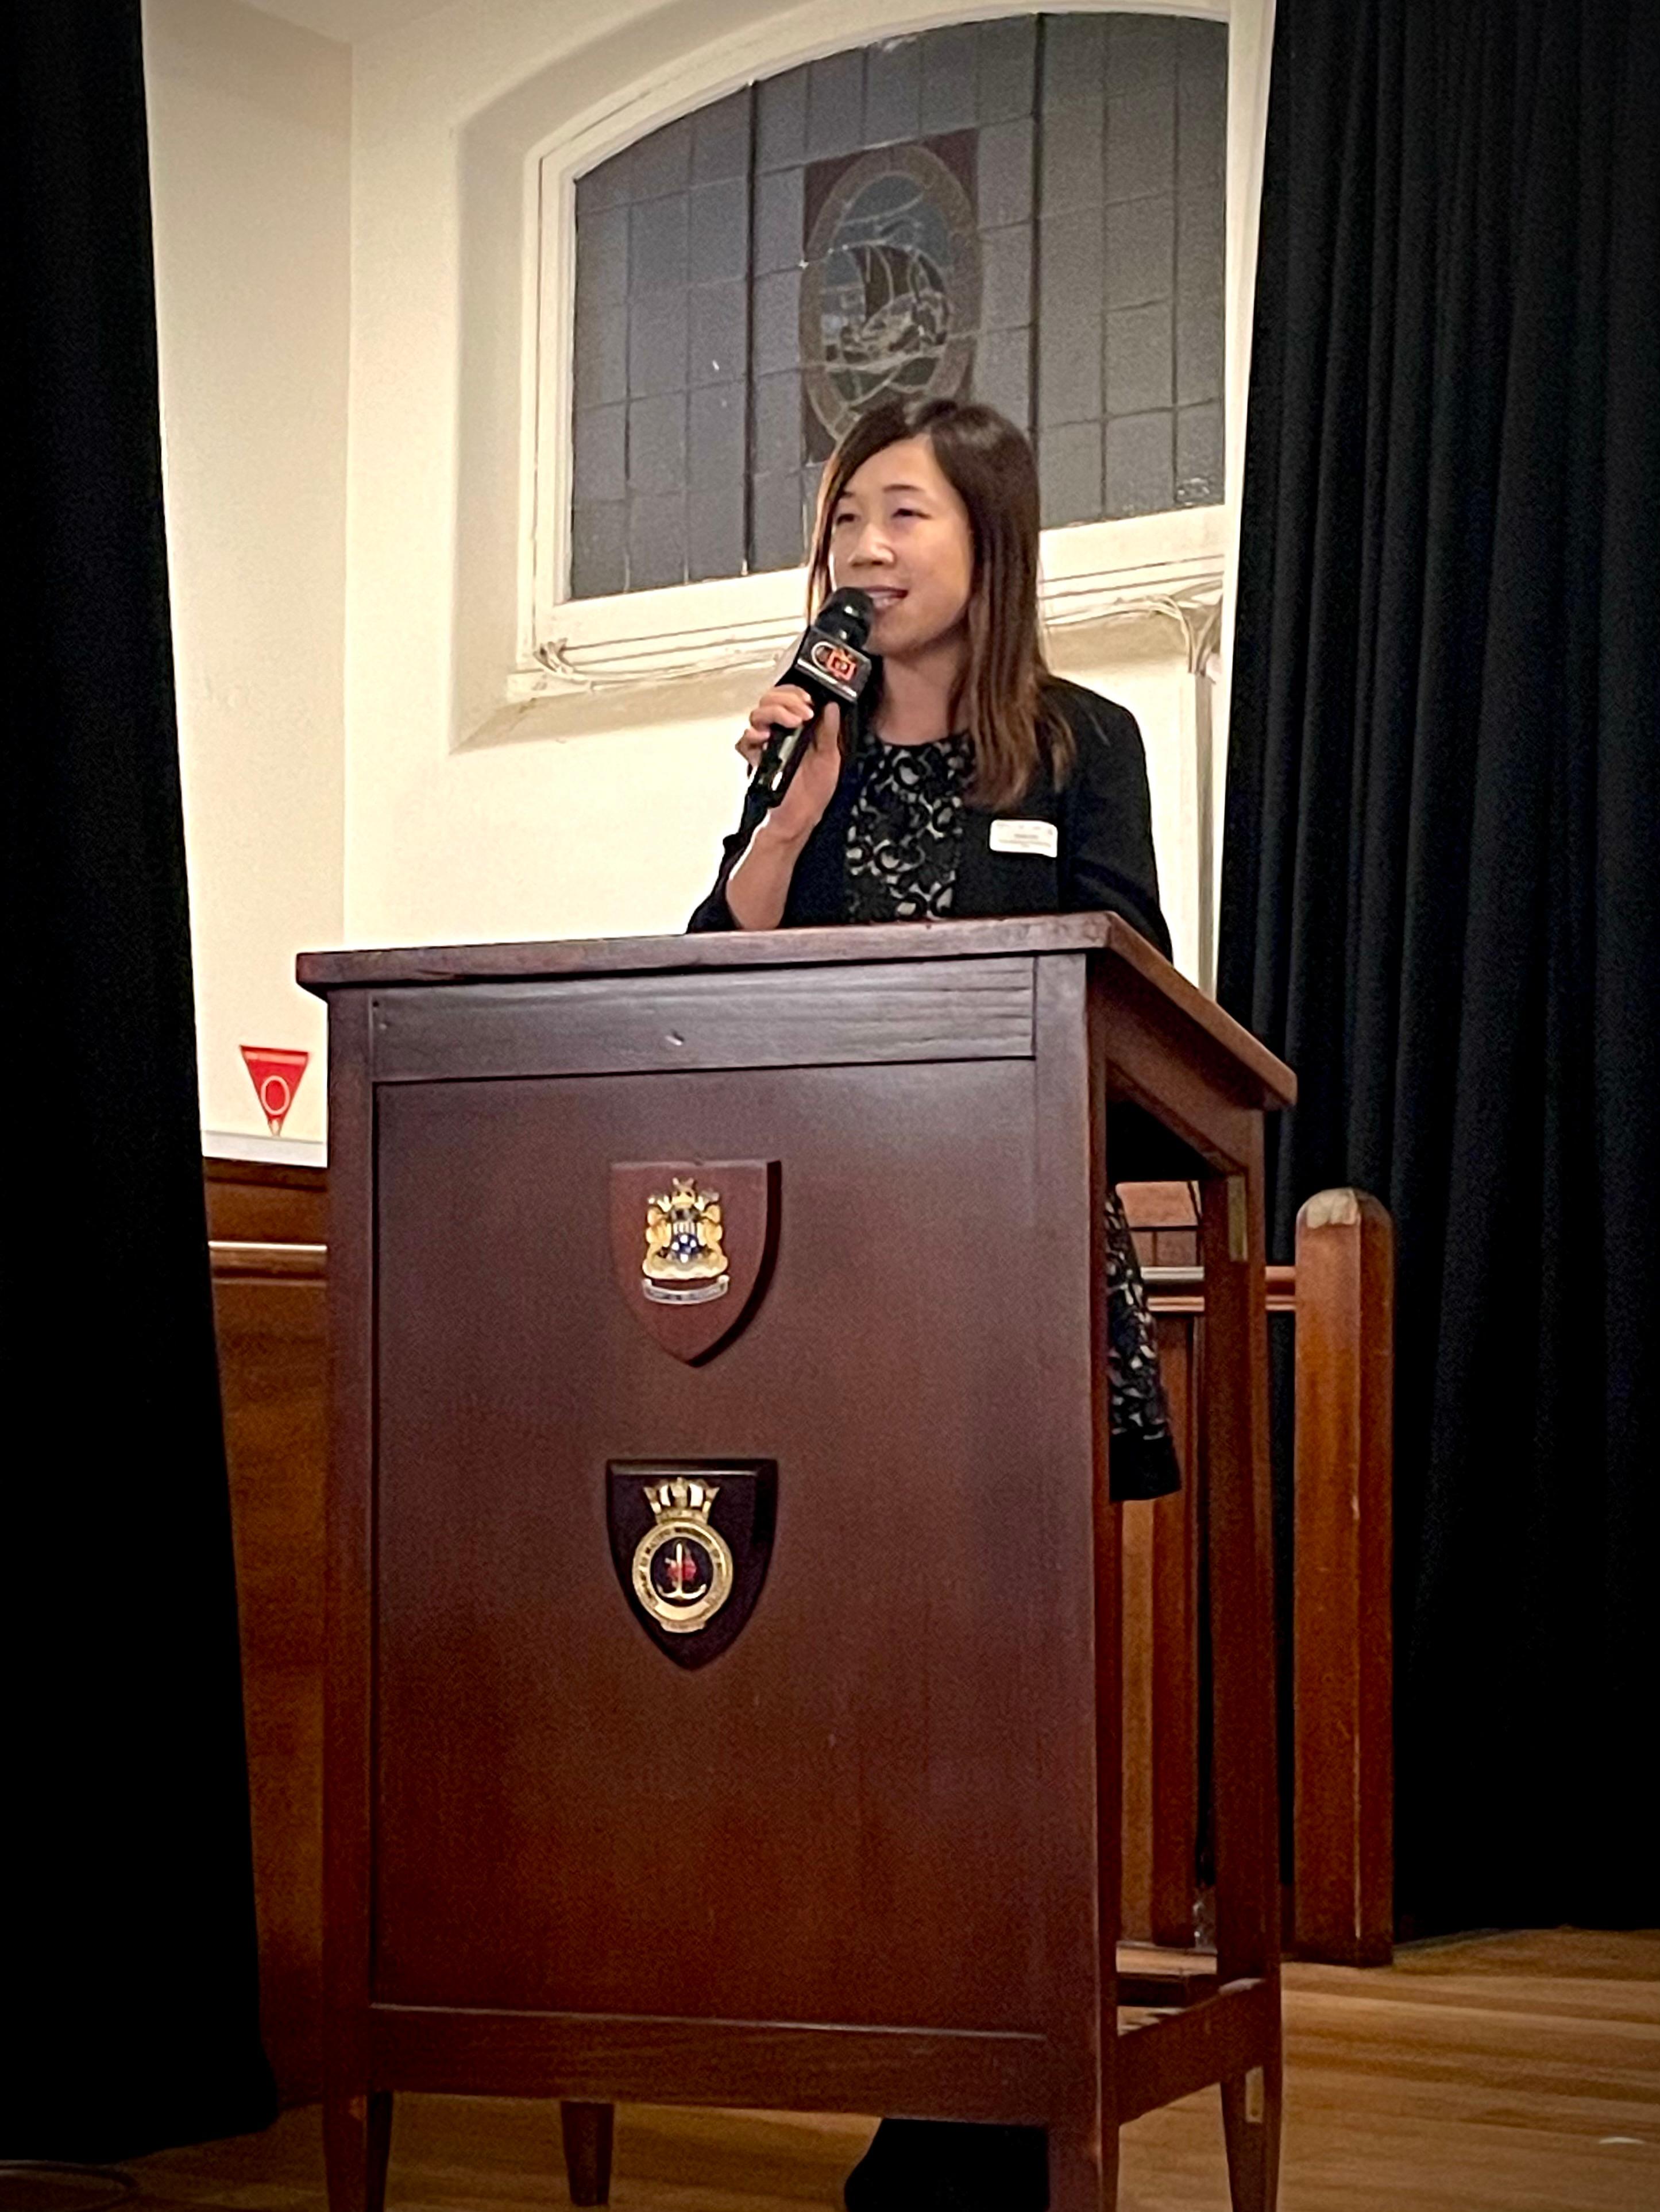 The Director of the Hong Kong Economic and Trade Office, Sydney, Miss Trista Lim, delivers welcoming remarks at a business seminar held in Melbourne, Australia, today (June 15) to promote the Government's initiatives to attract top talents and strategic businesses and encourage participants to take part in the upcoming Asian Logistics, Maritime and Aviation Conference.